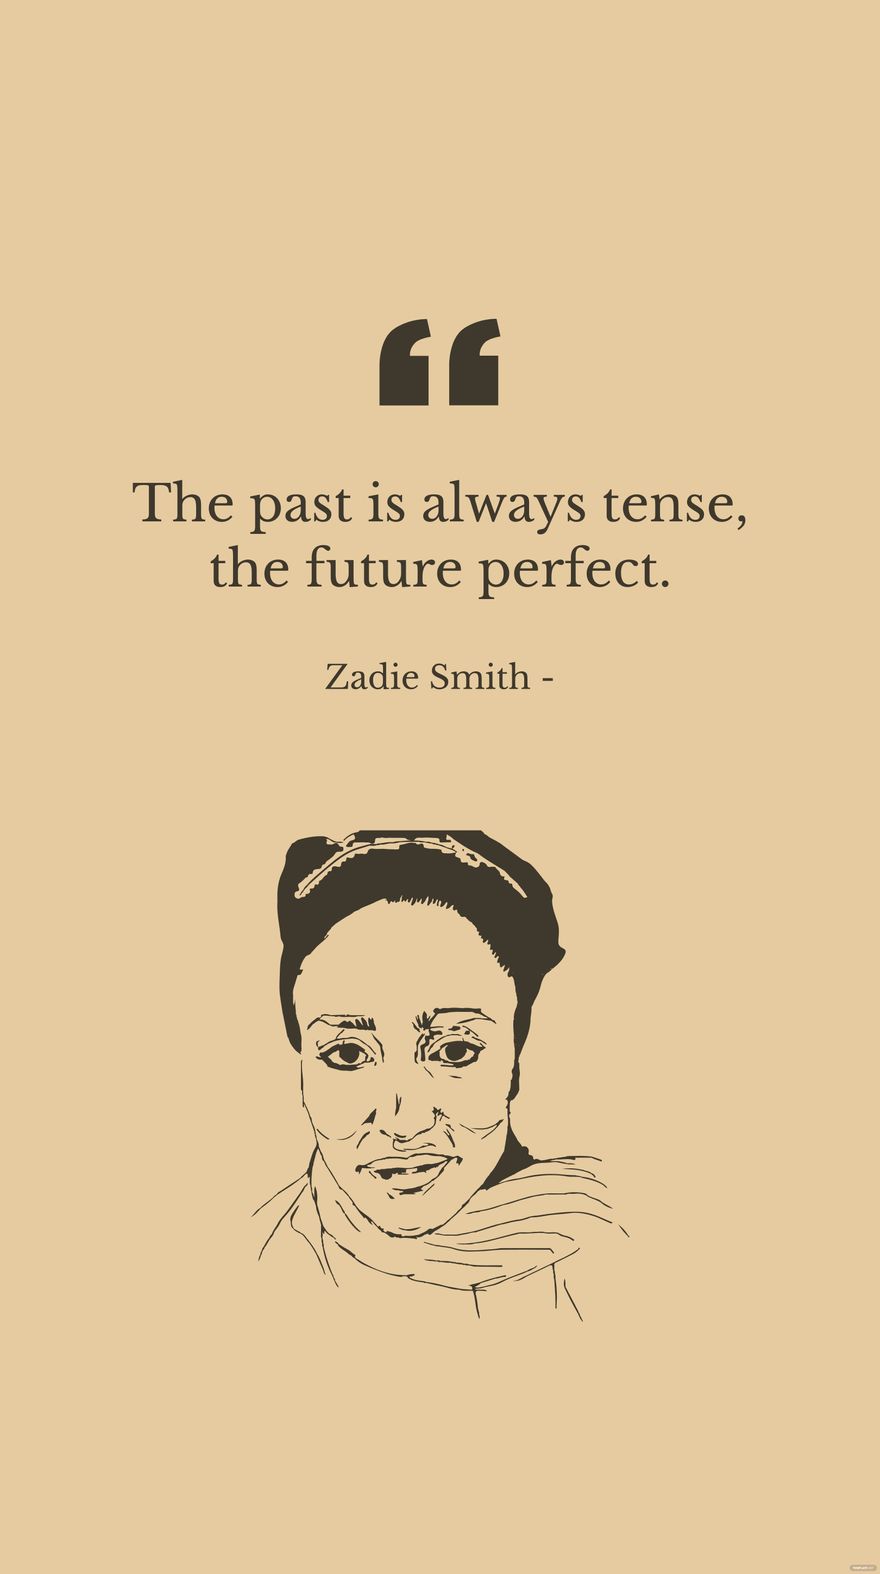 Free Zadie Smith - The past is always tense, the future perfect. in JPG